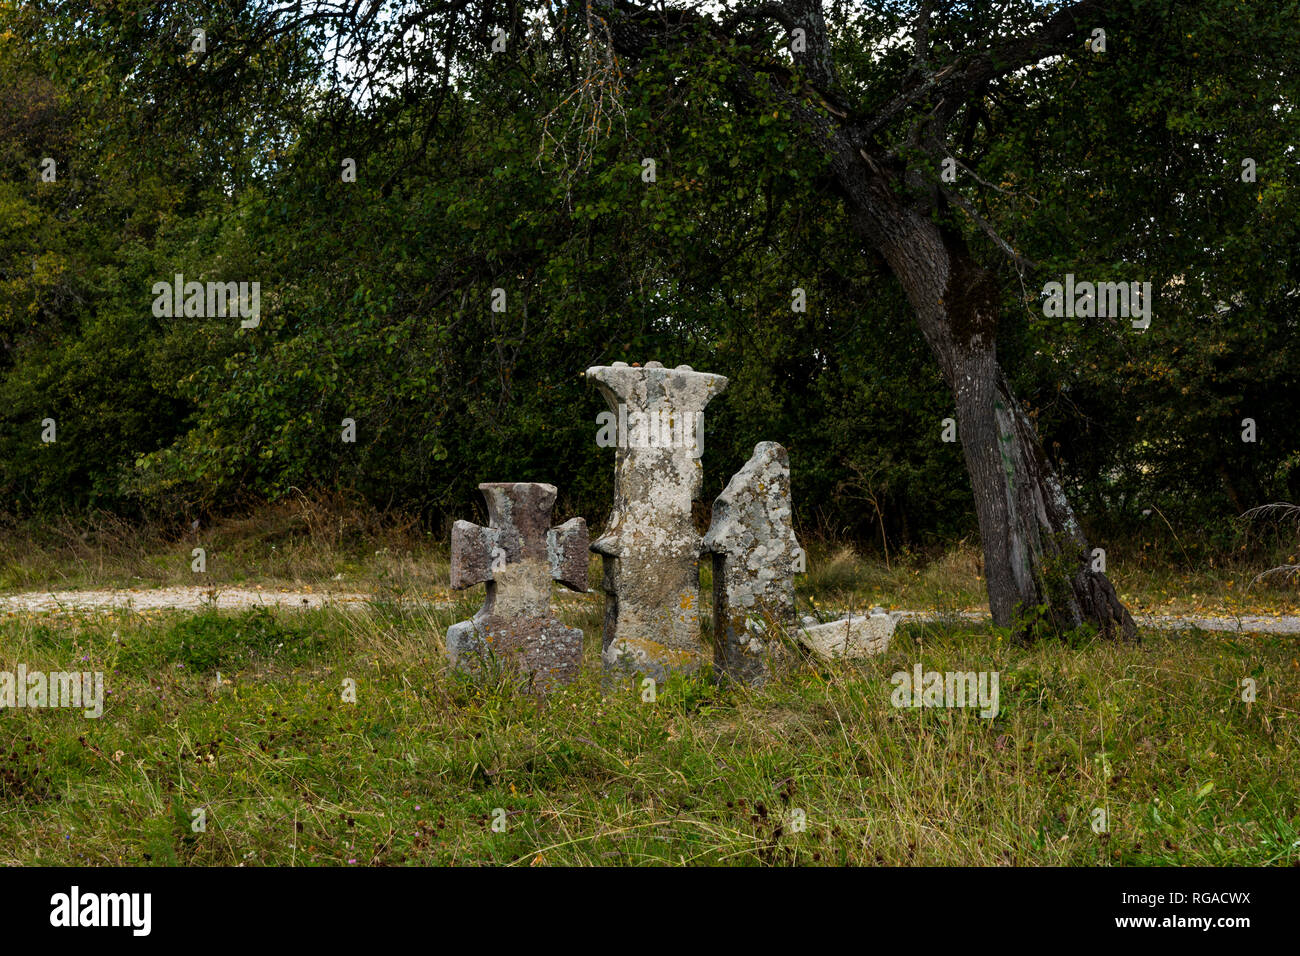 Koprivsticki krst ( Koprivsticki cross ), it is a holy sanctuary, and testimonial place, raised against paranormal activities, vampires, witches, etc. Stock Photo